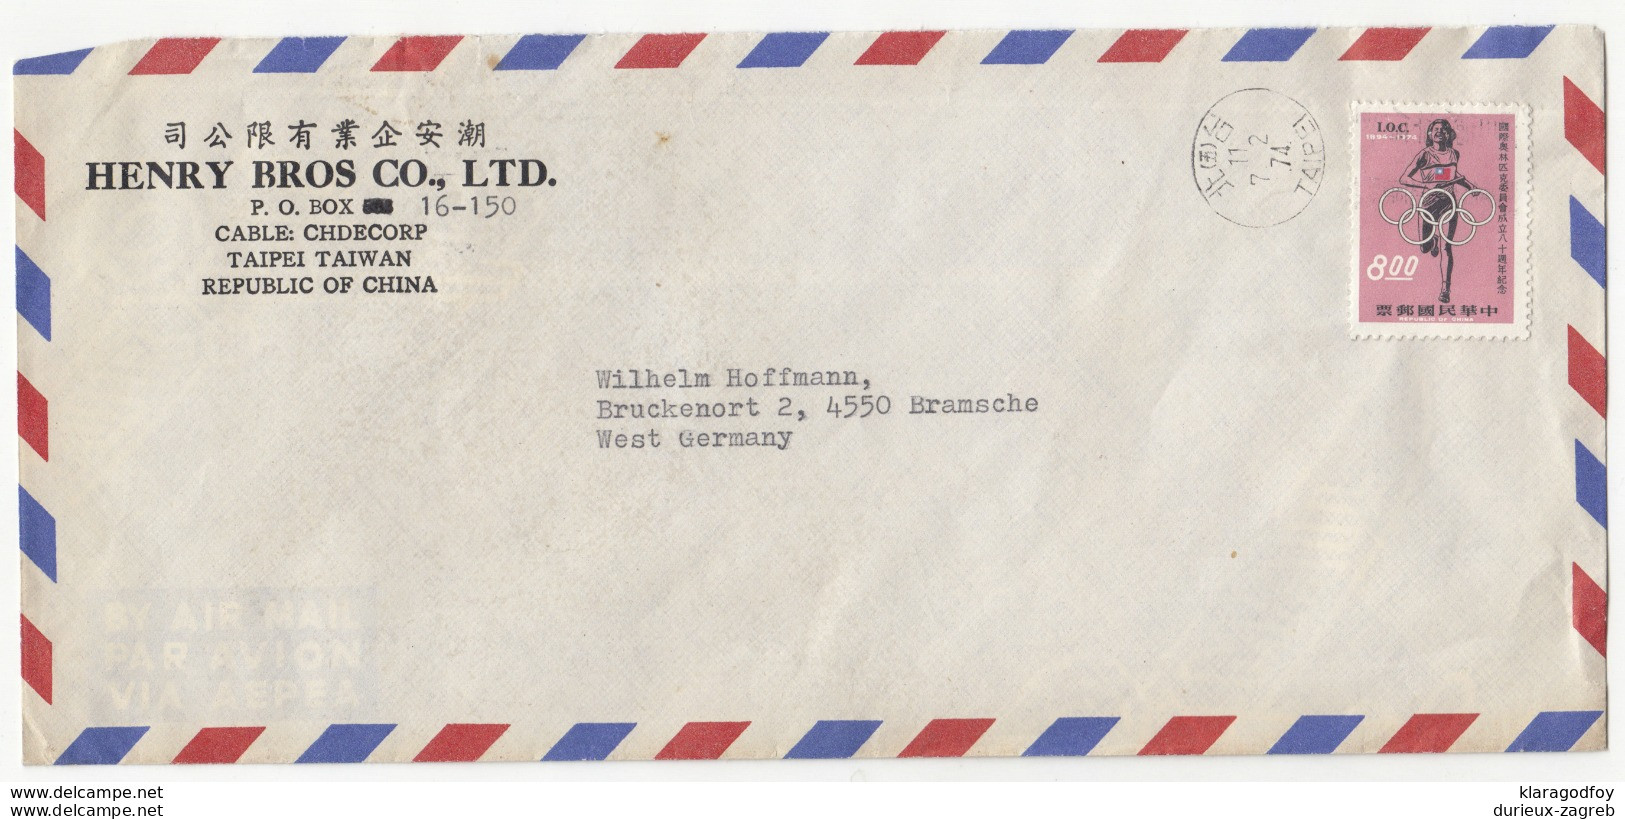 Henry Bros Co. Taipei Company Air Mail Letter Cover Travelled 1974 To Germany  B190920 - Lettres & Documents